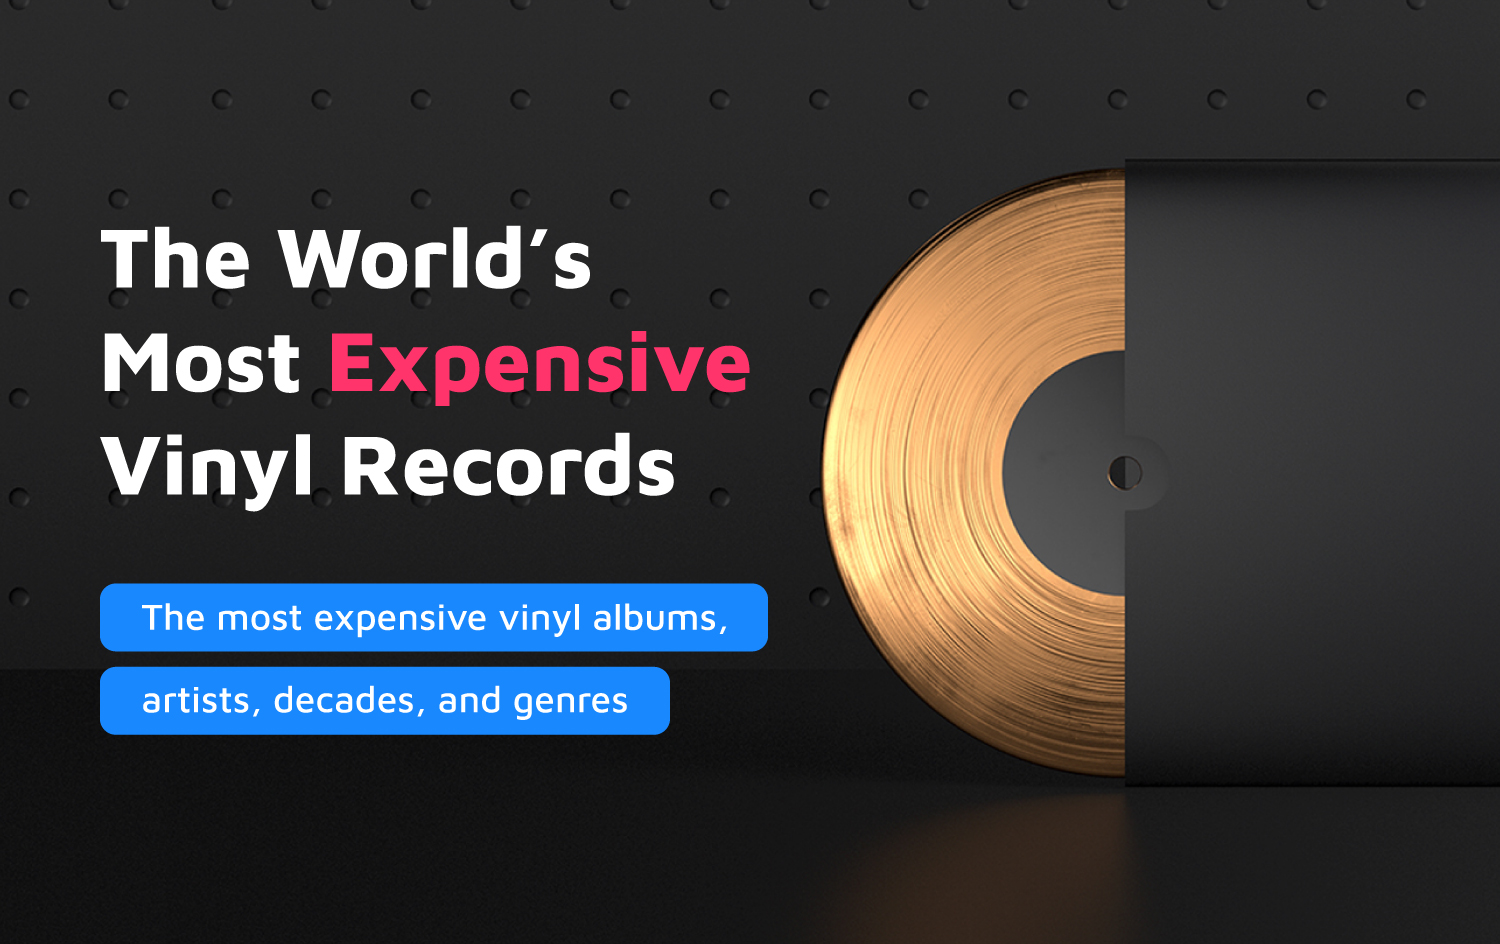 World’s Most Expensive Vinyl Records